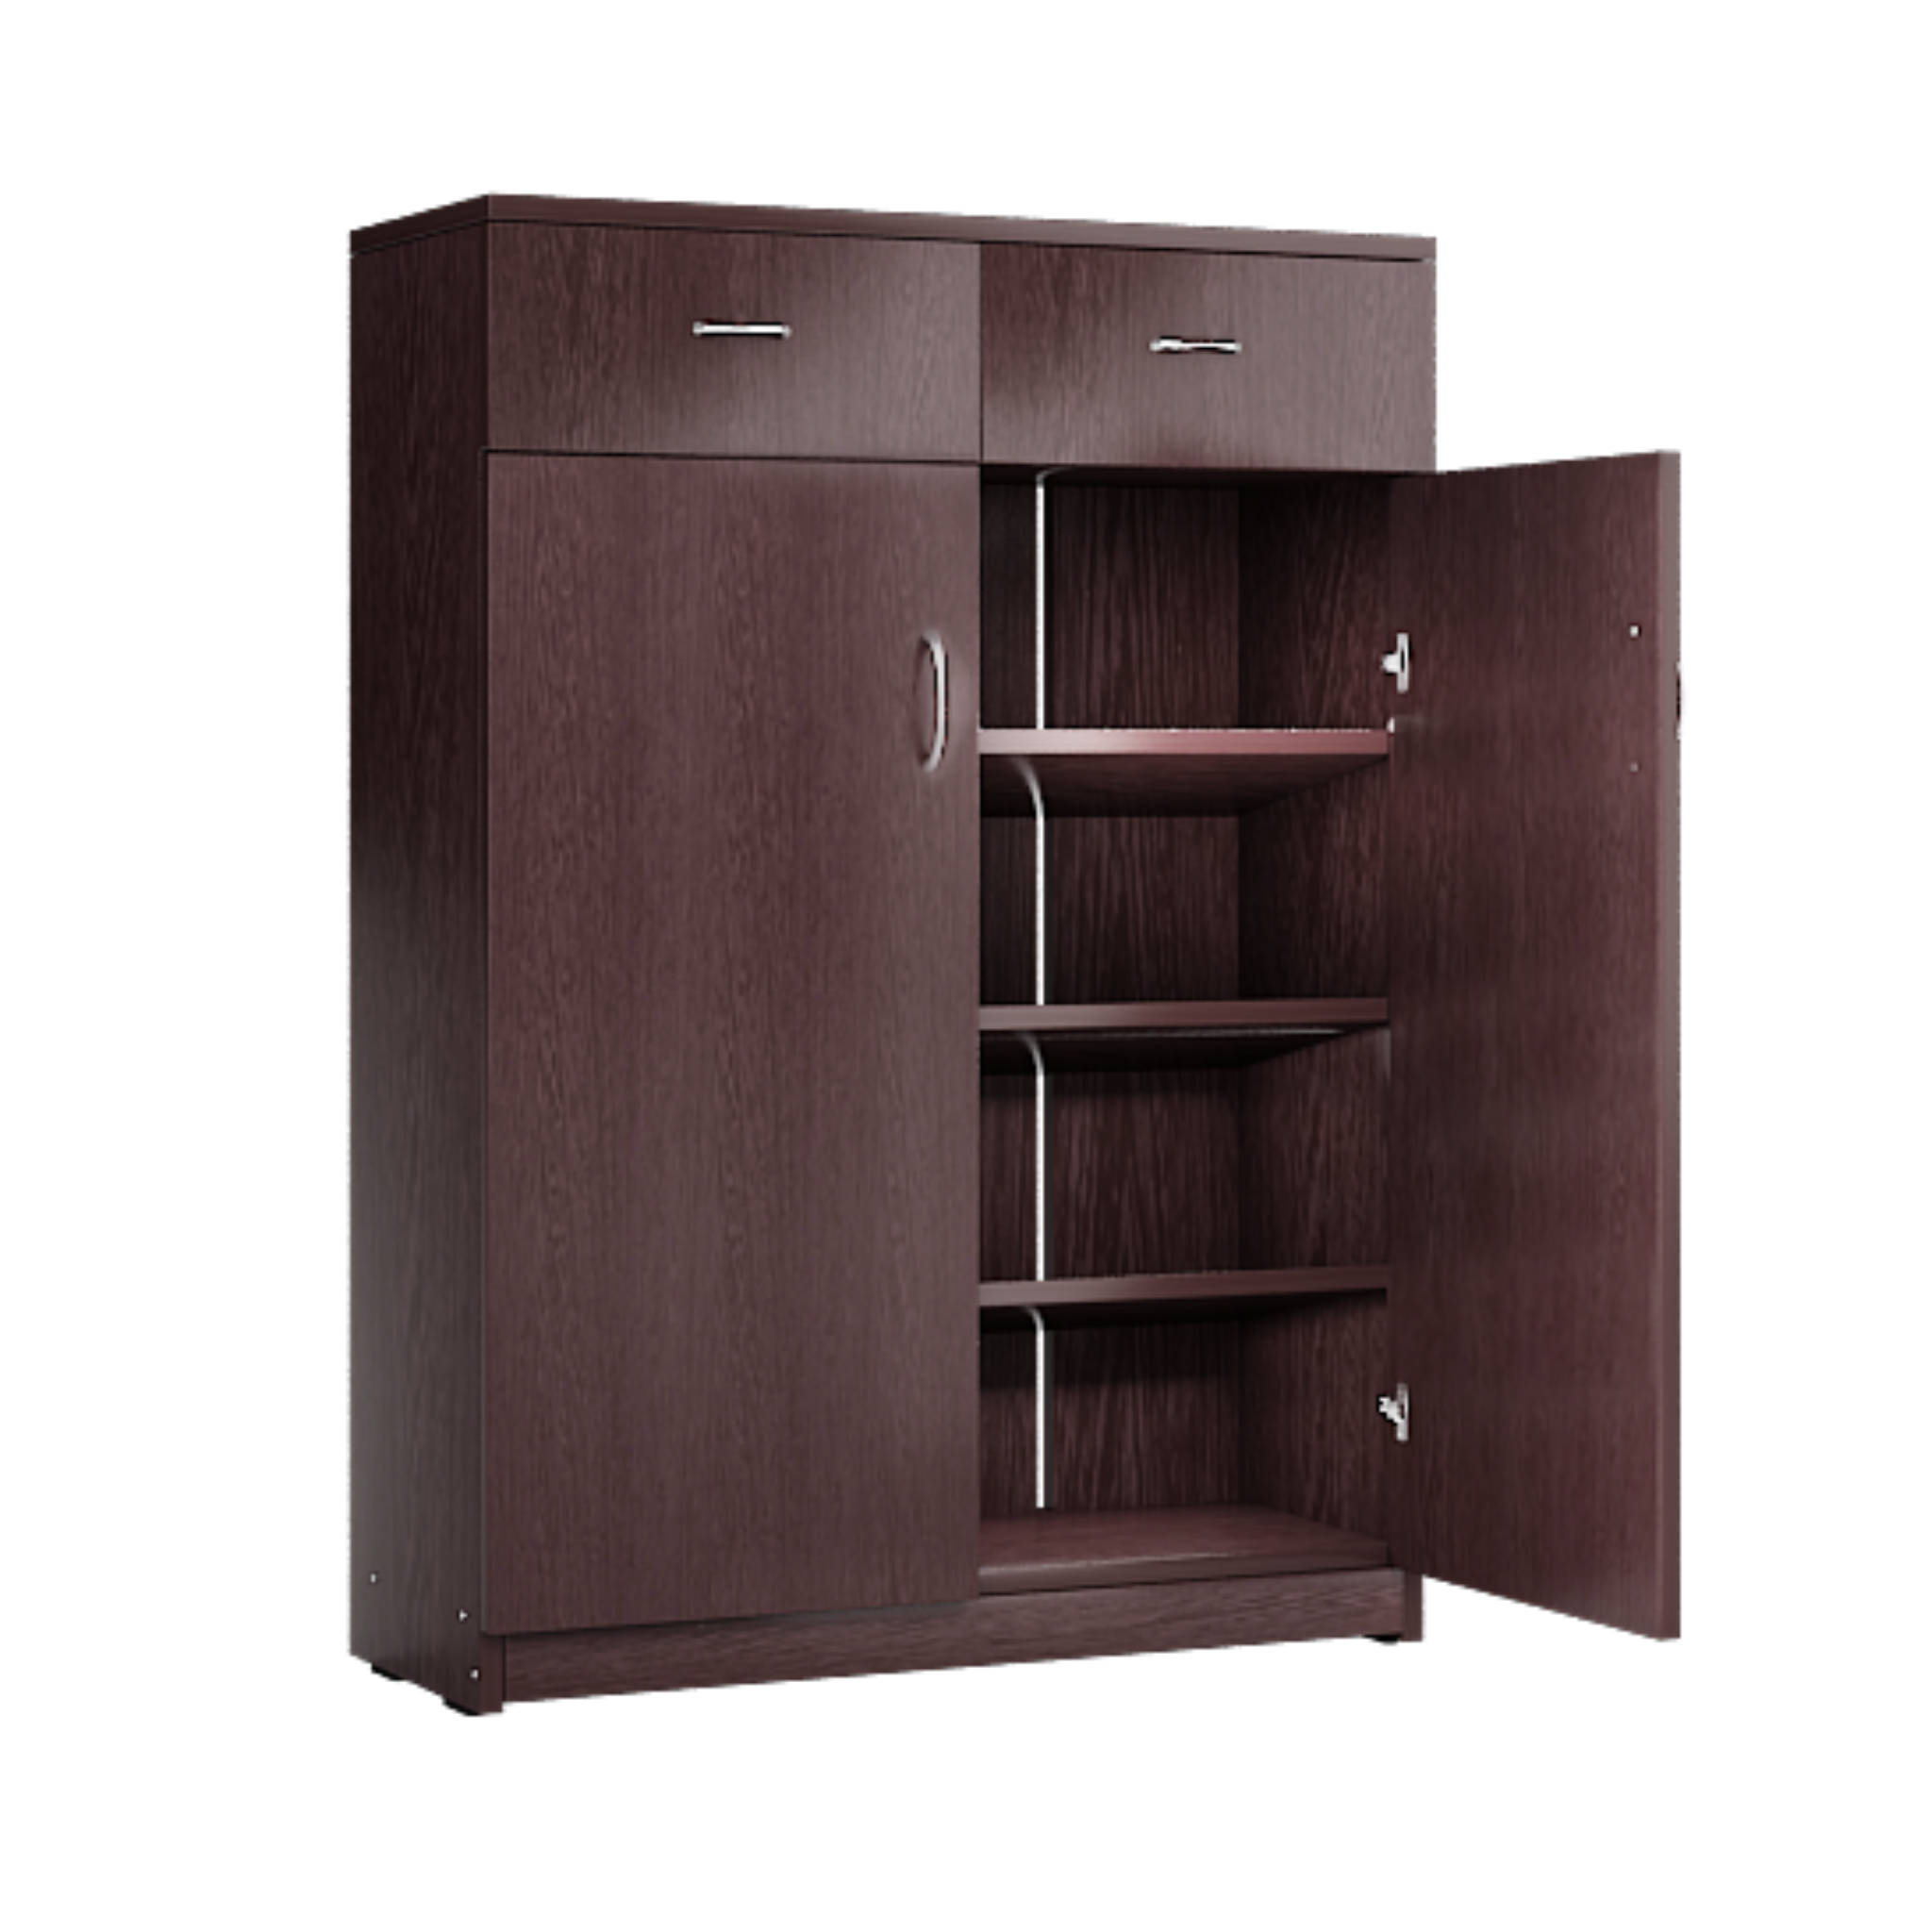 Two Door Cabinet Shoe Rack with Dual Drawer Storage